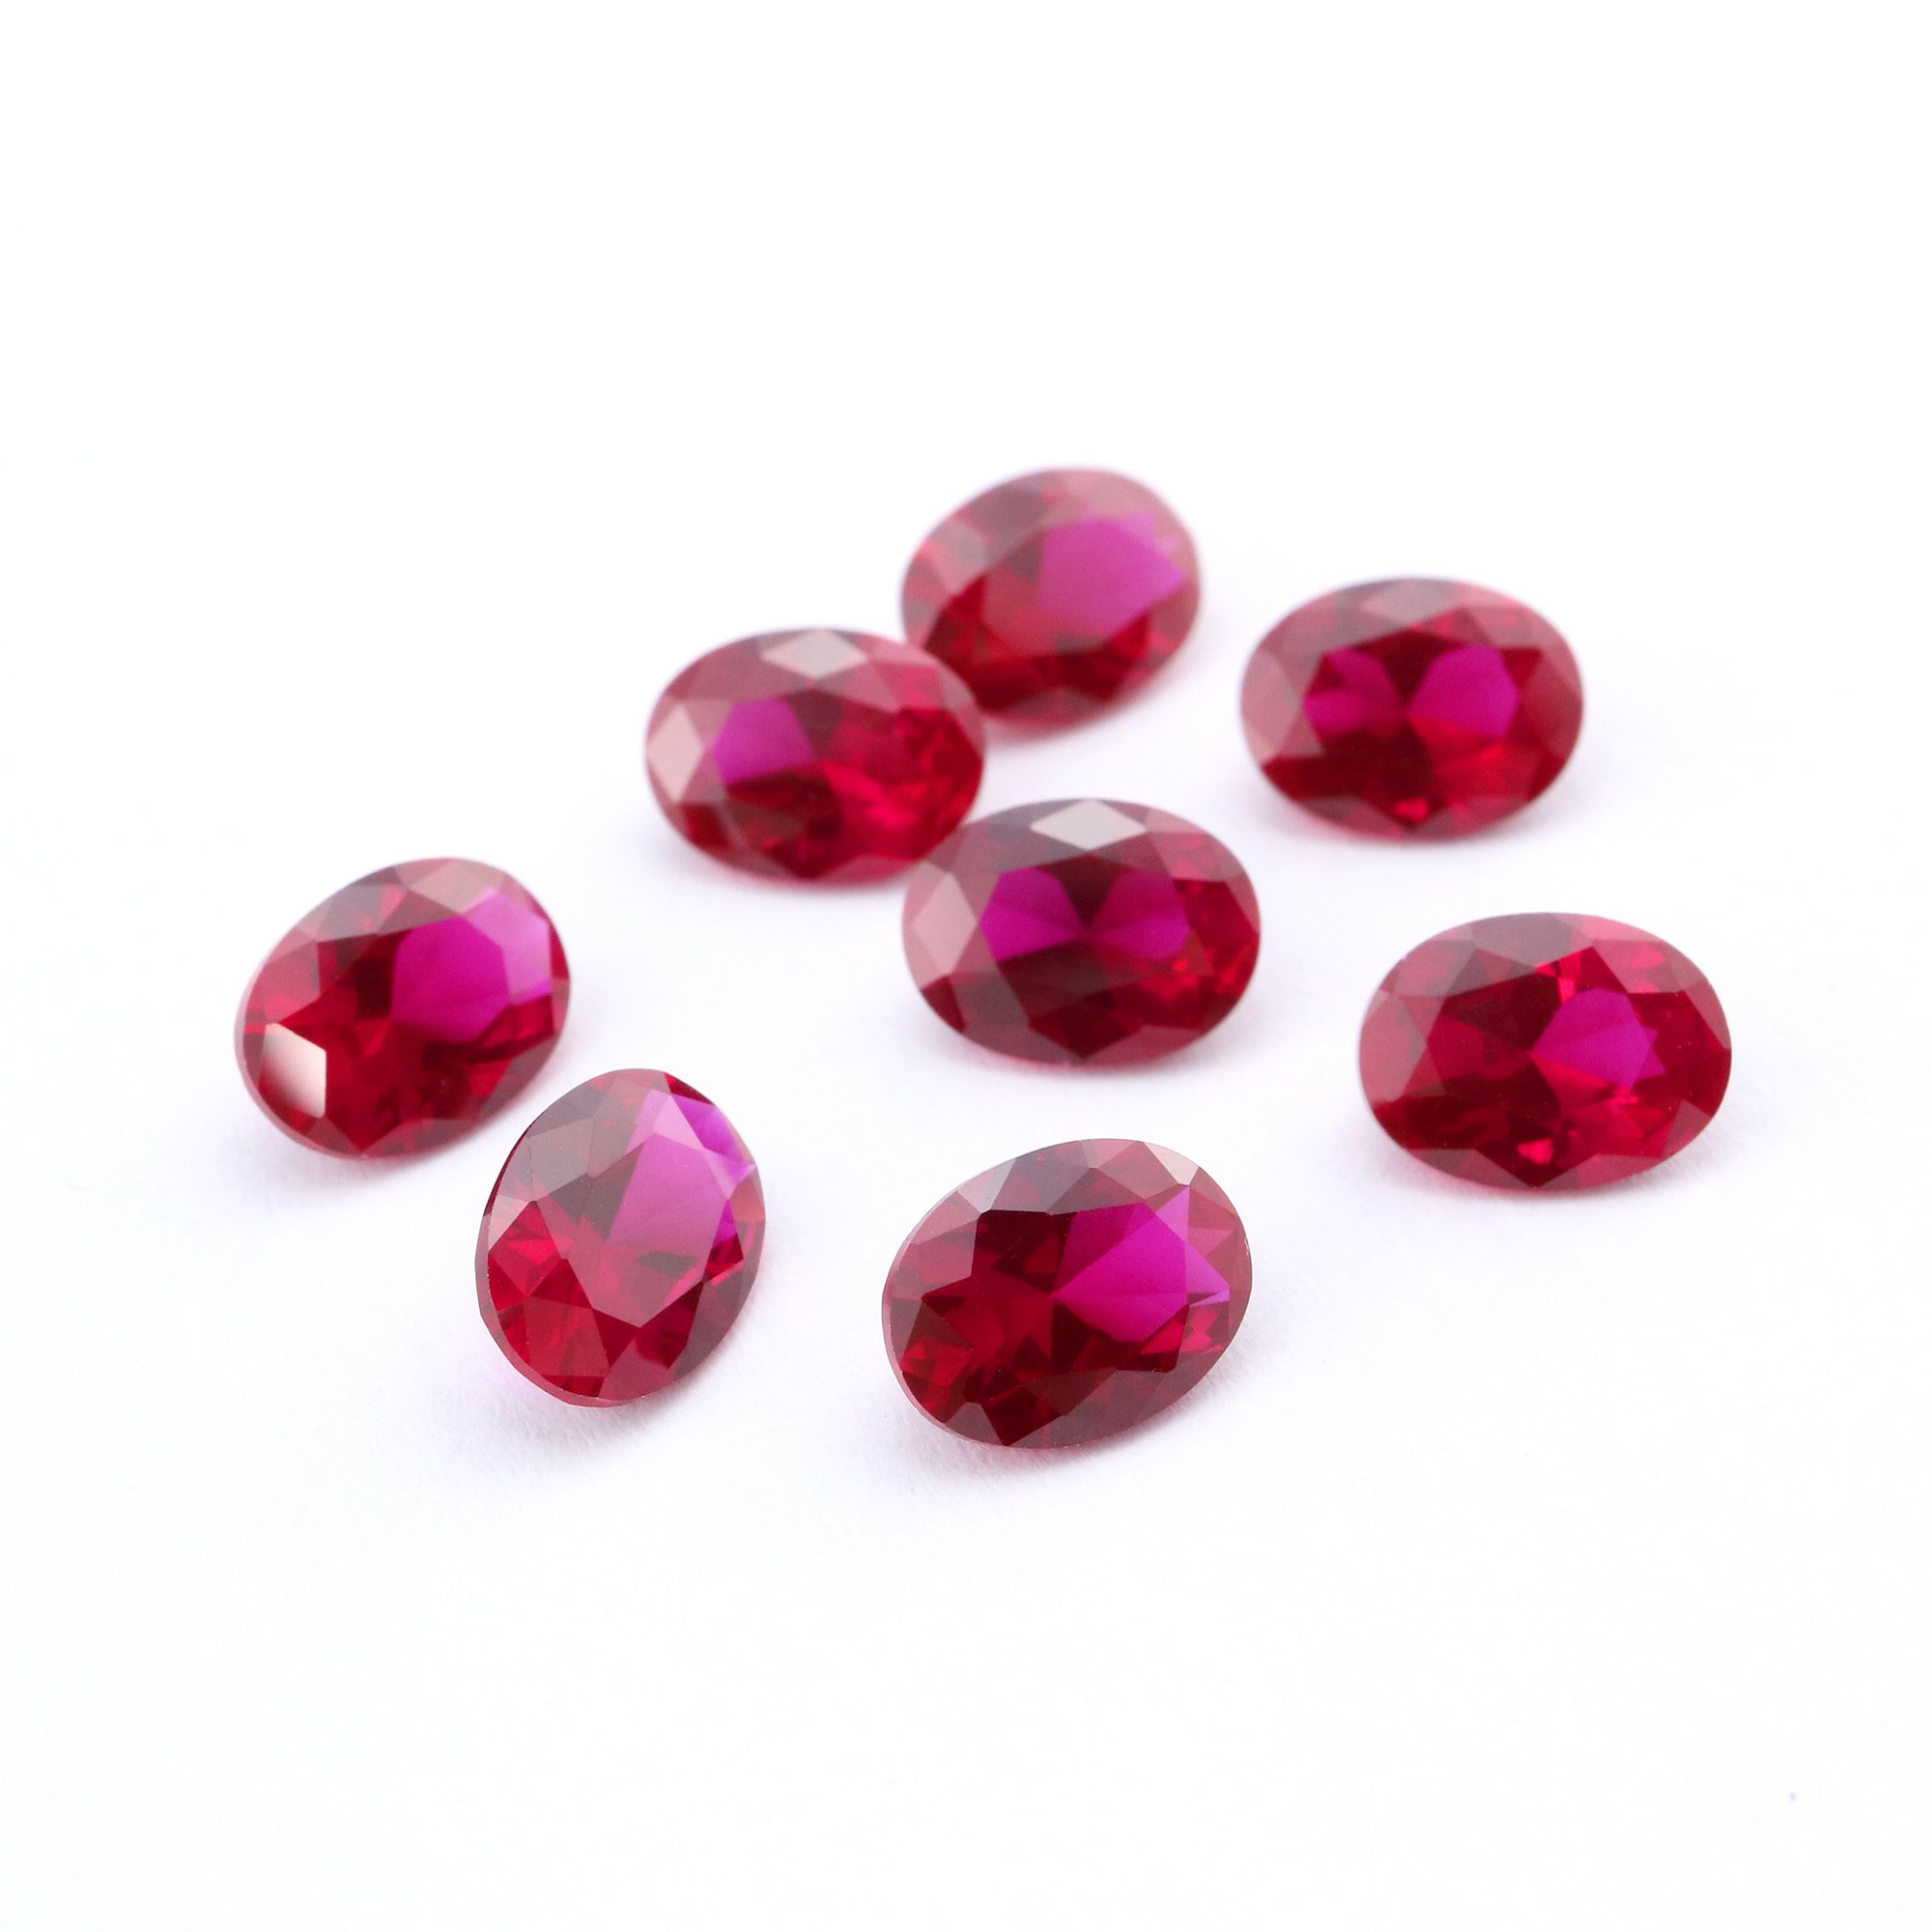 5Pcs Lab Created Oval Ruby July Birthstone Red Faceted Loose Gemstone DIY Jewelry Supplies 4120126 - Click Image to Close